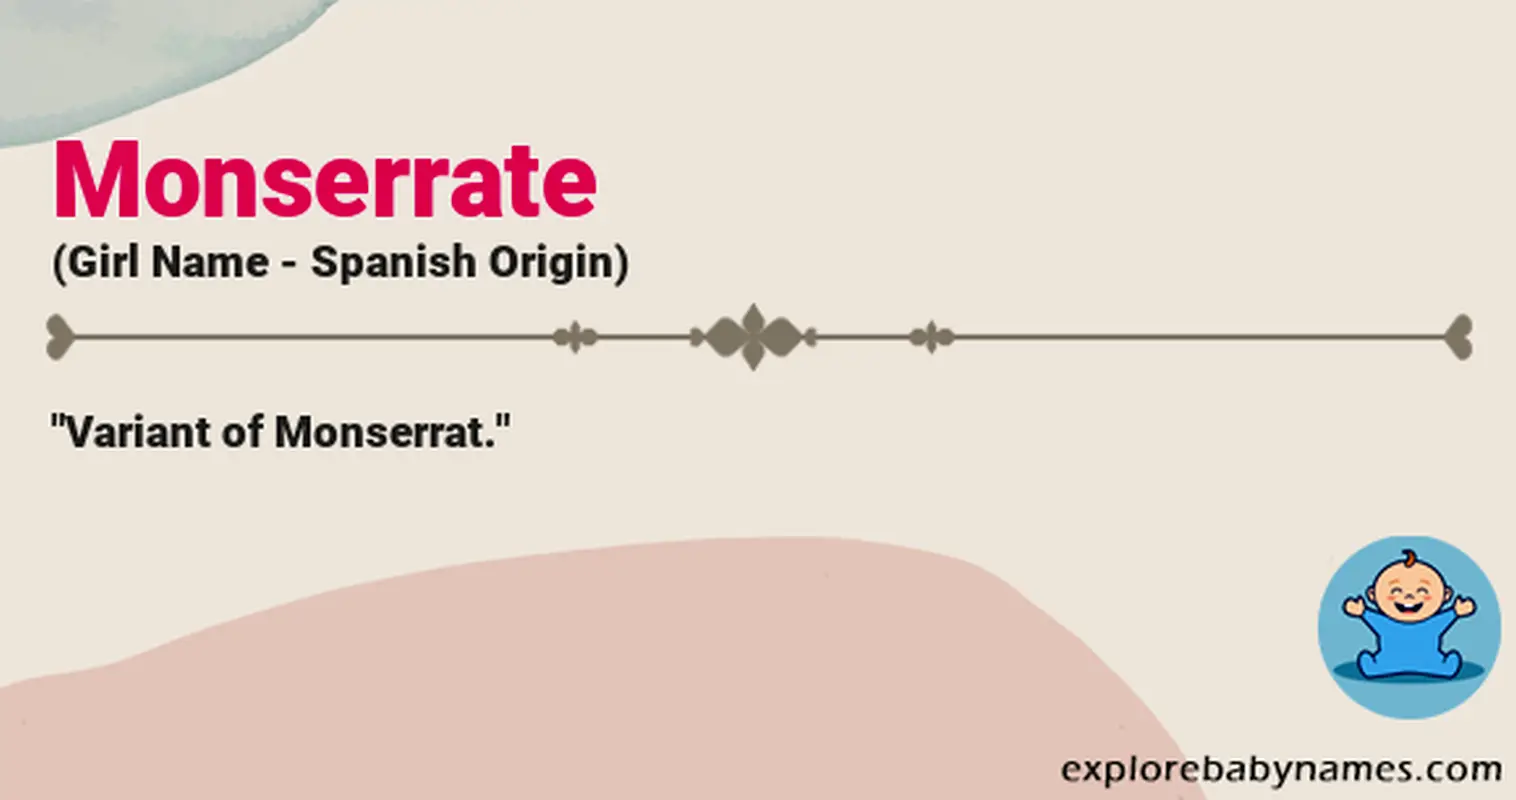 Meaning of Monserrate